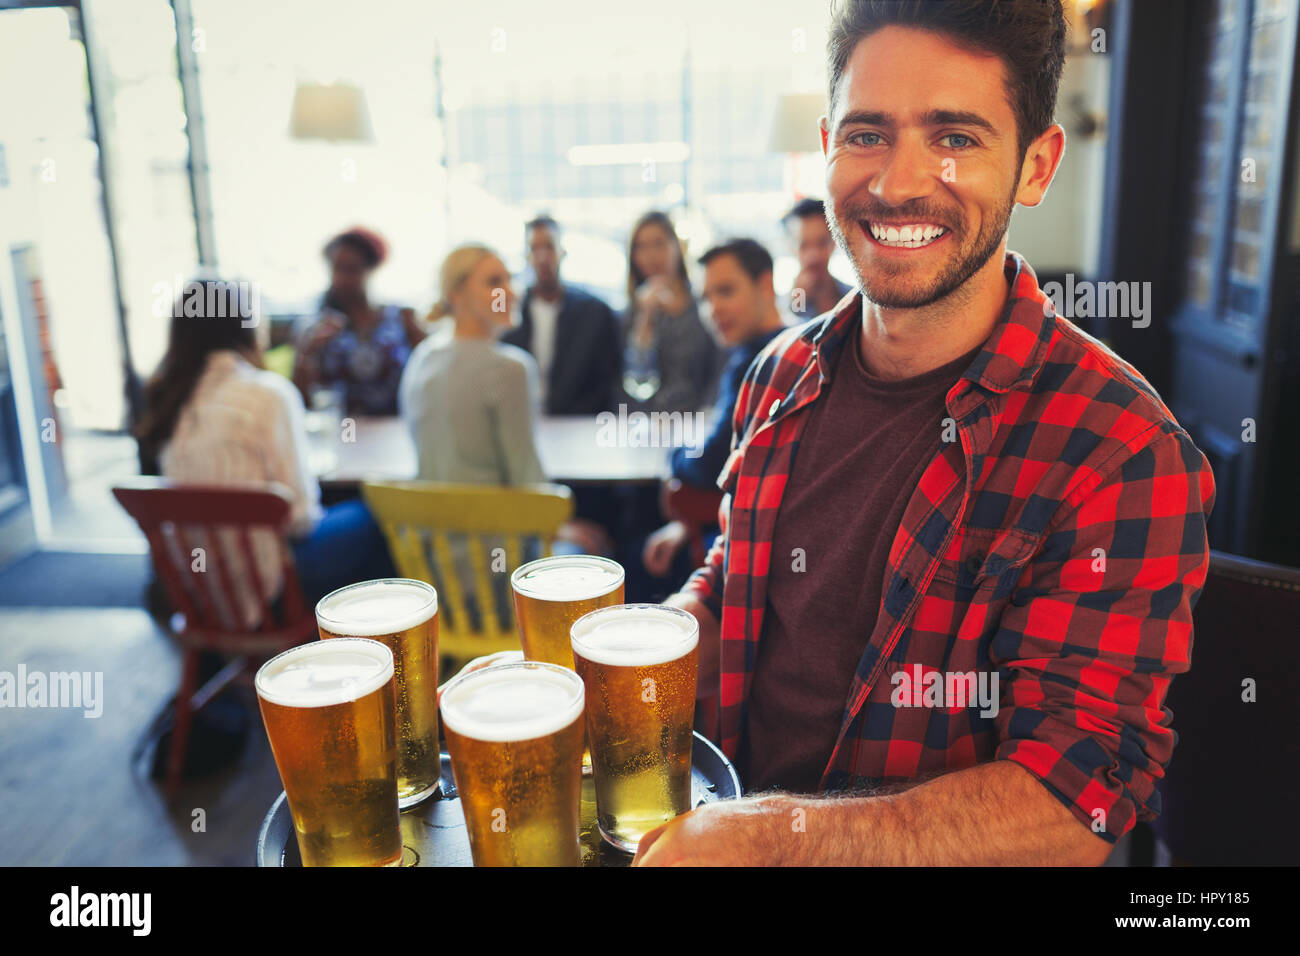 Portrait smiling bartender carrying tray of beer glasses in bar Stock Photo